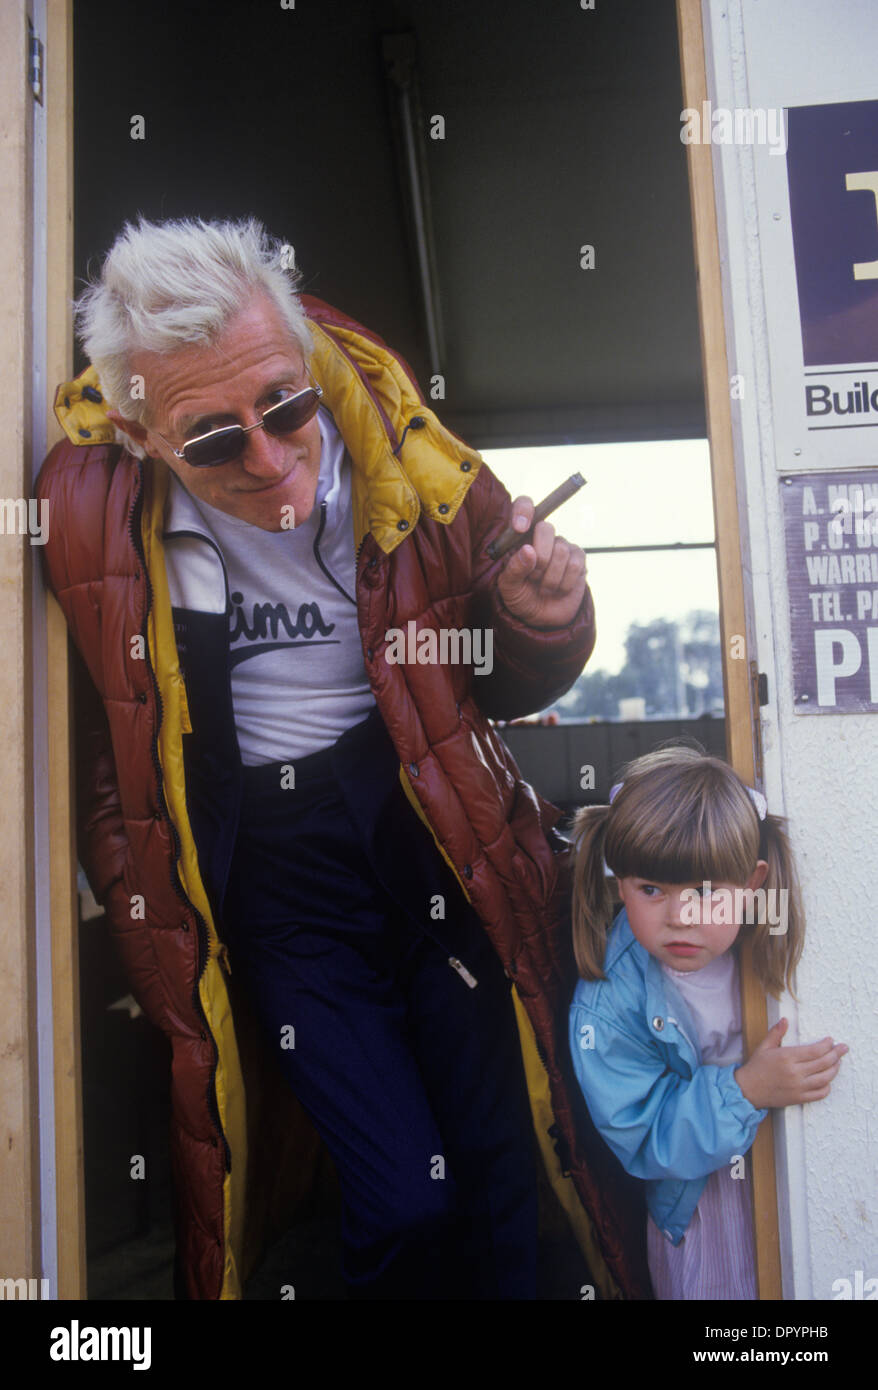 Jimmy Savile, British entertainer & disc jockey, TV & radio broadcaster with a pre-teen girl child. He is smoking his trademark cigar. Late1980s or early 1990s, Roundhay, Leeds UK  HOMER SYKES Stock Photo